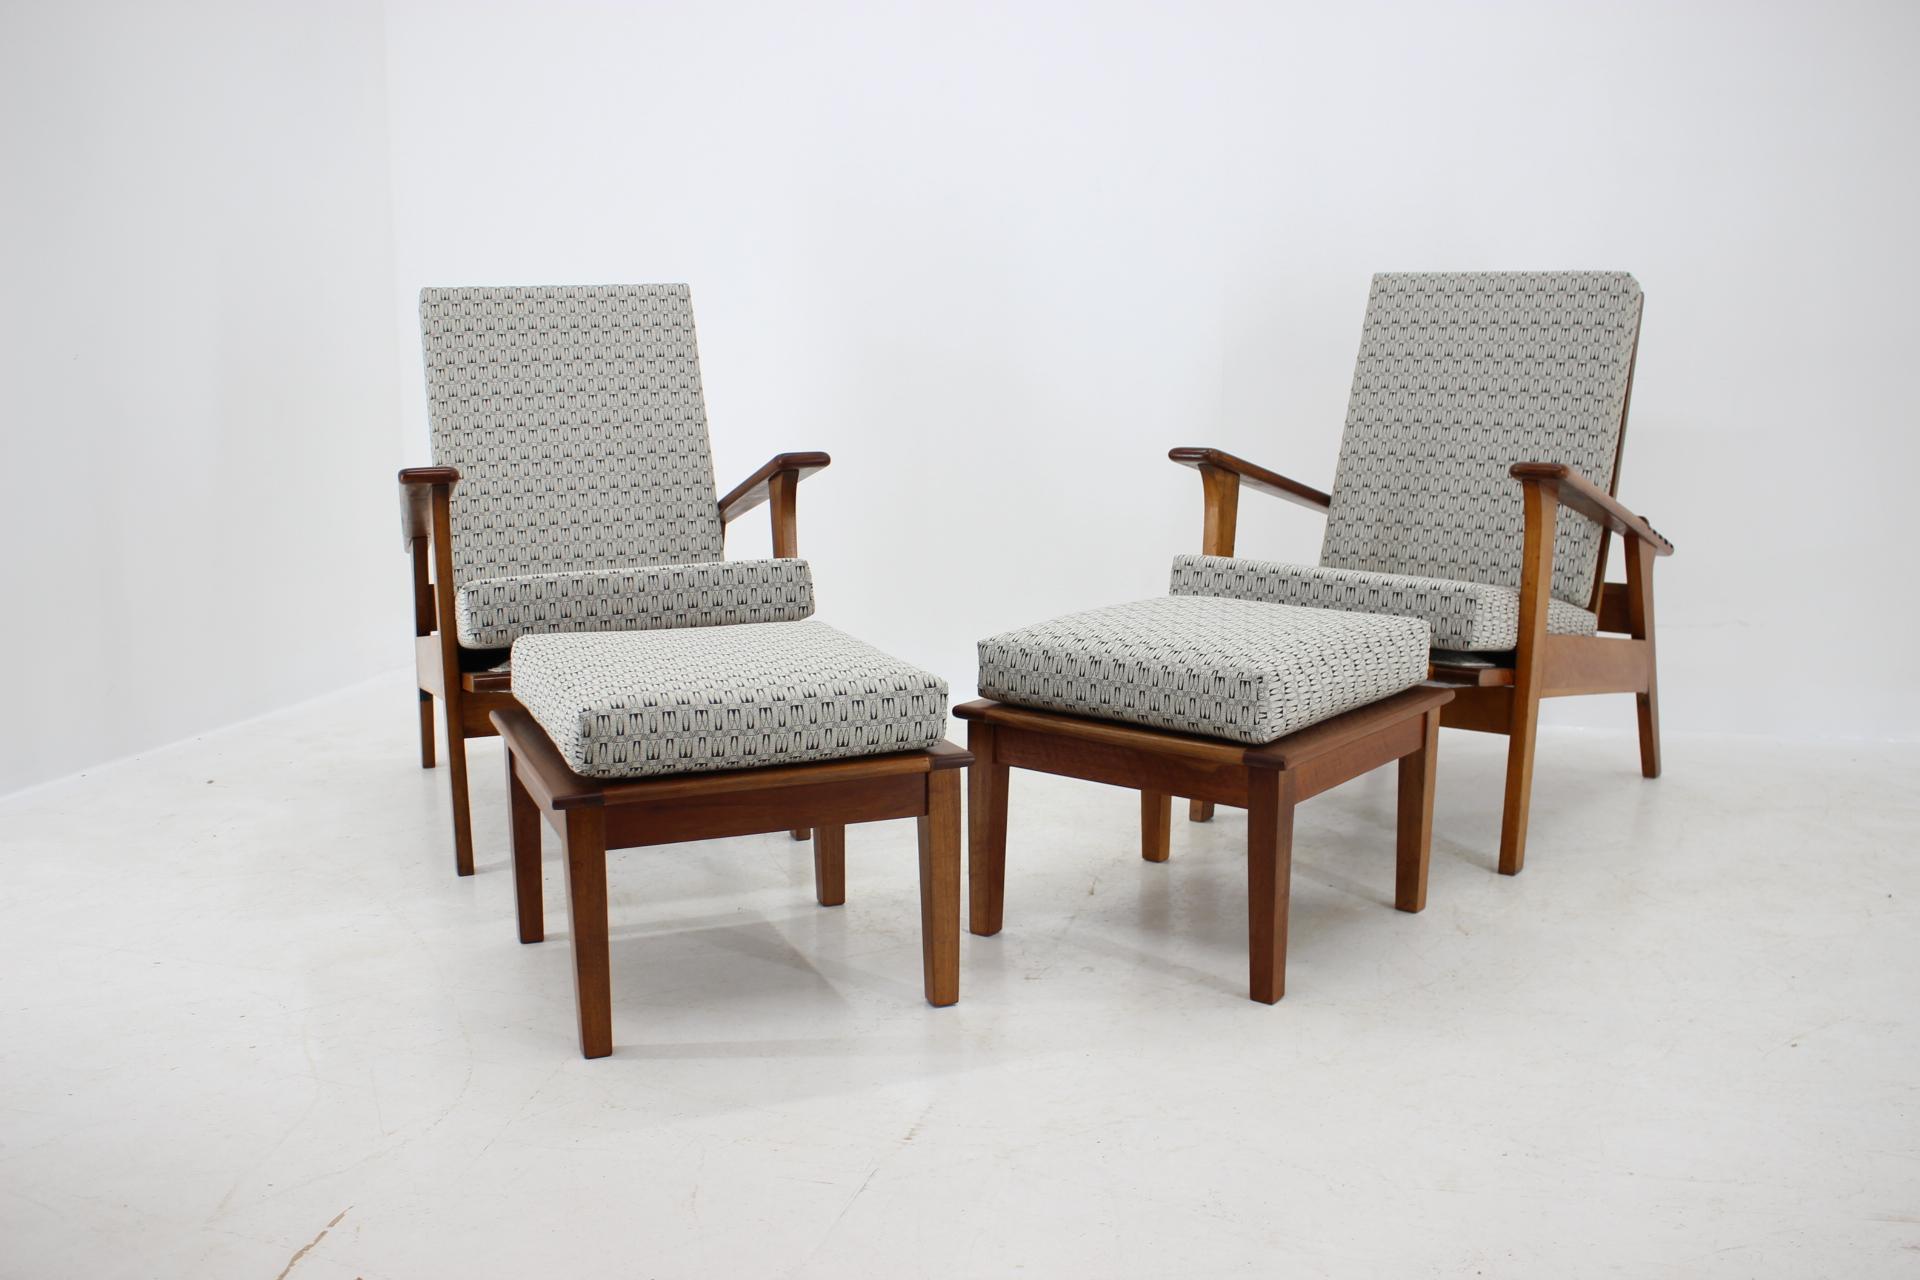 - Very rare model
- Made of solid walnut wood
- Carefully refurbished
- Newly upholstered
- Stools: 43 x 52 x 52cm.